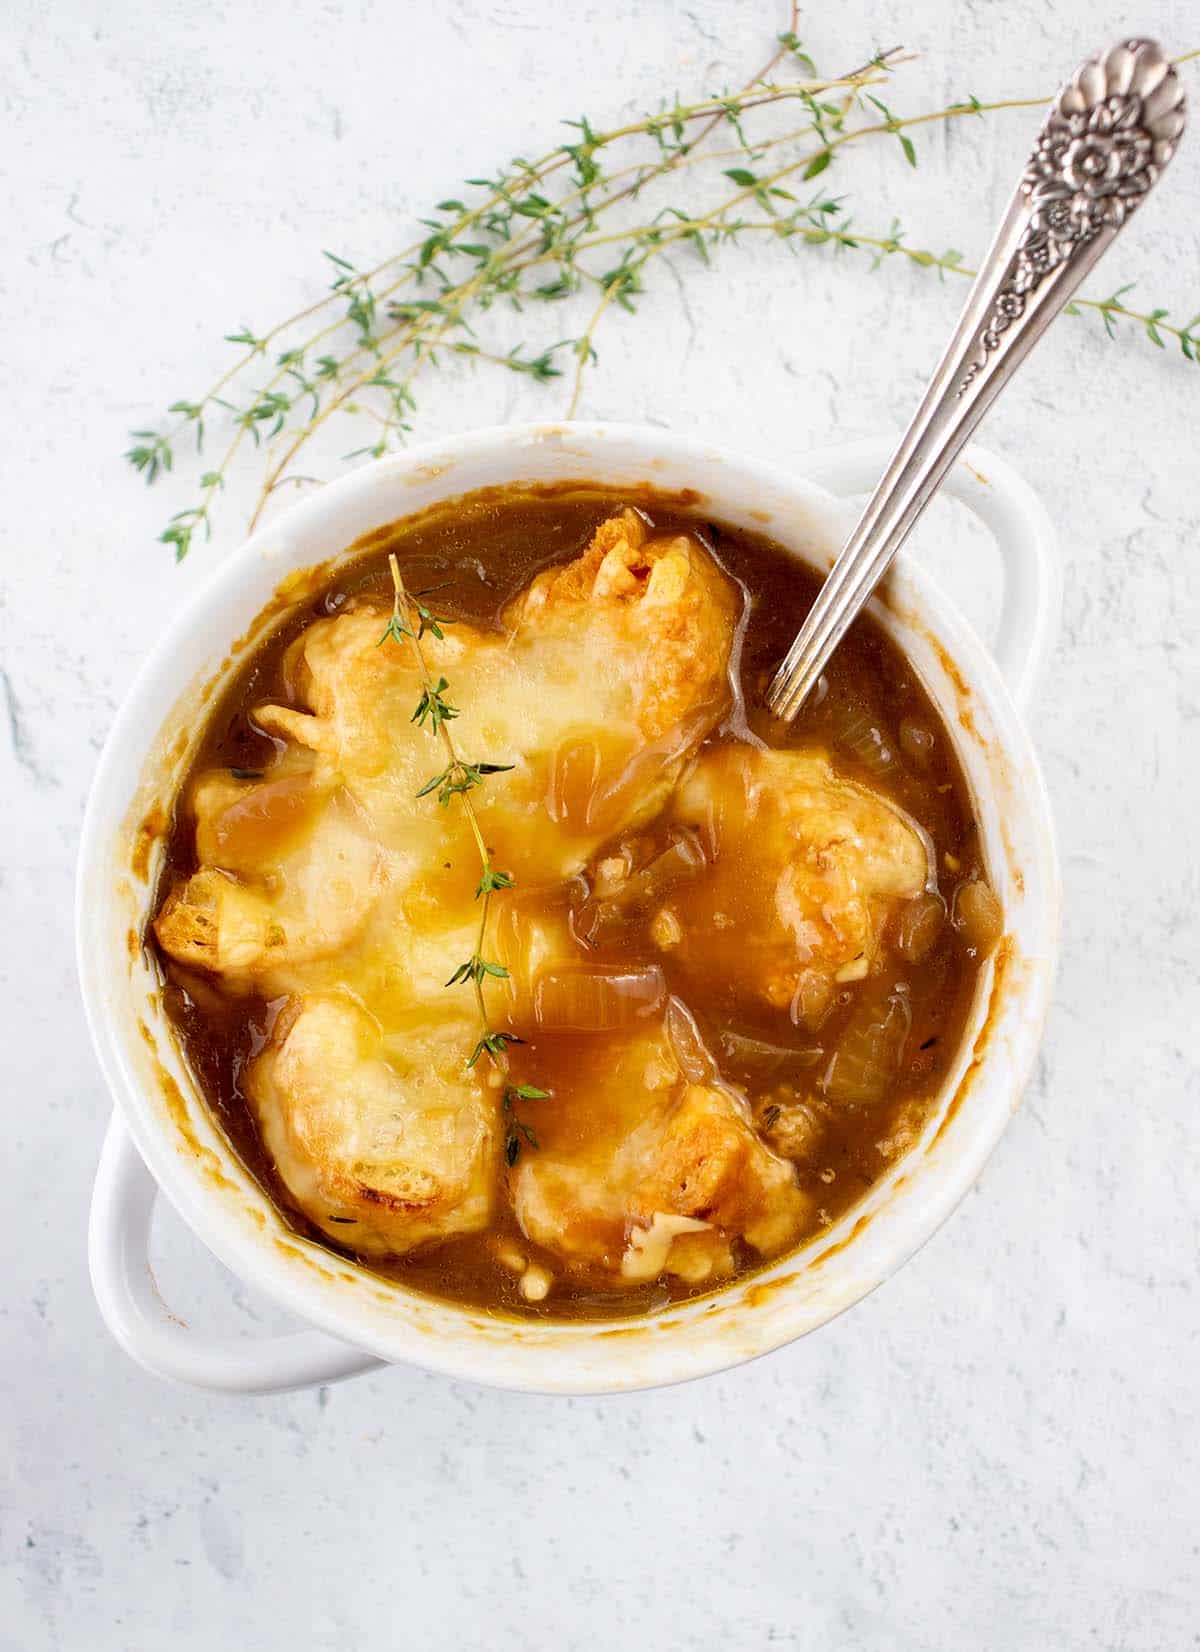 Vegetarian french onion soup in a white bowl with cheesy crouton topping and a silver spoon. Fresh thyme on top for garnish and beside the bowl.